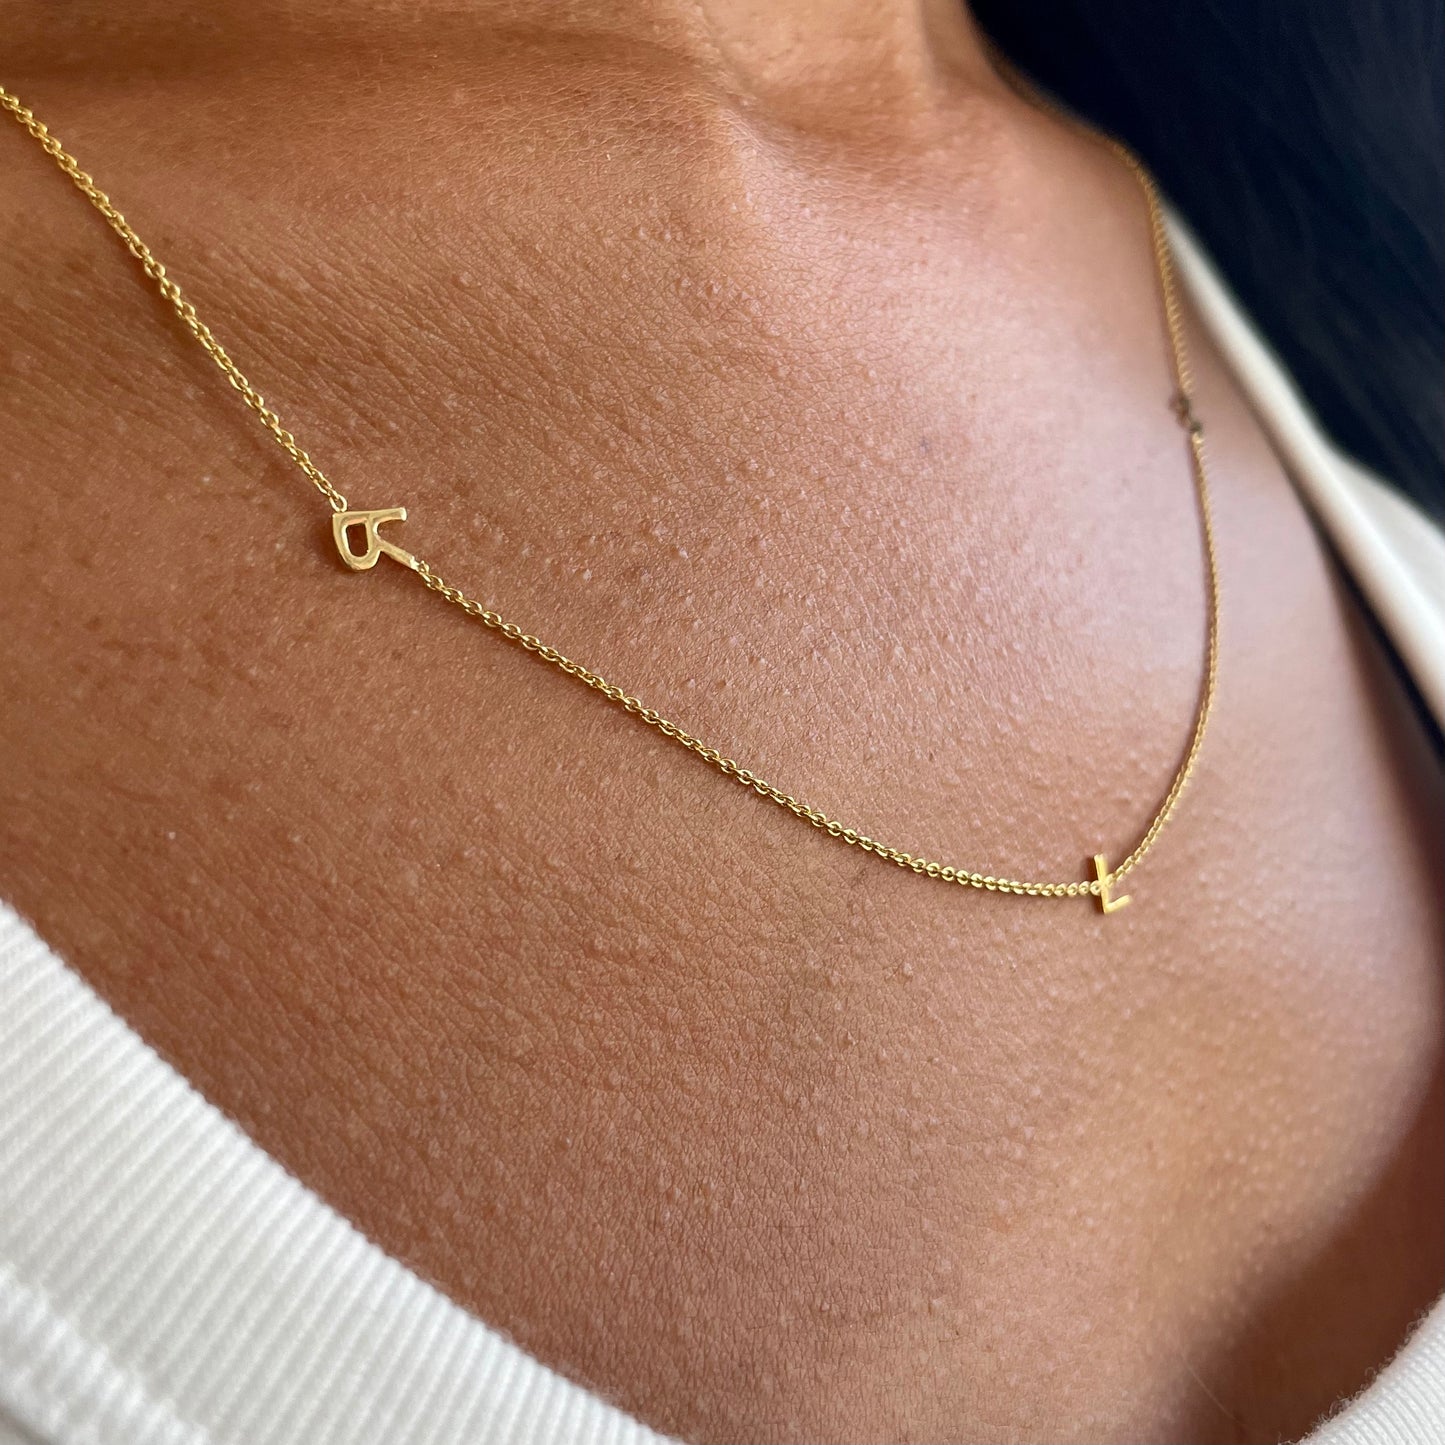 3 Initials Letter Solid Gold Necklace - - Jewelry - Goldie Paris Jewelry - Moms Necklace